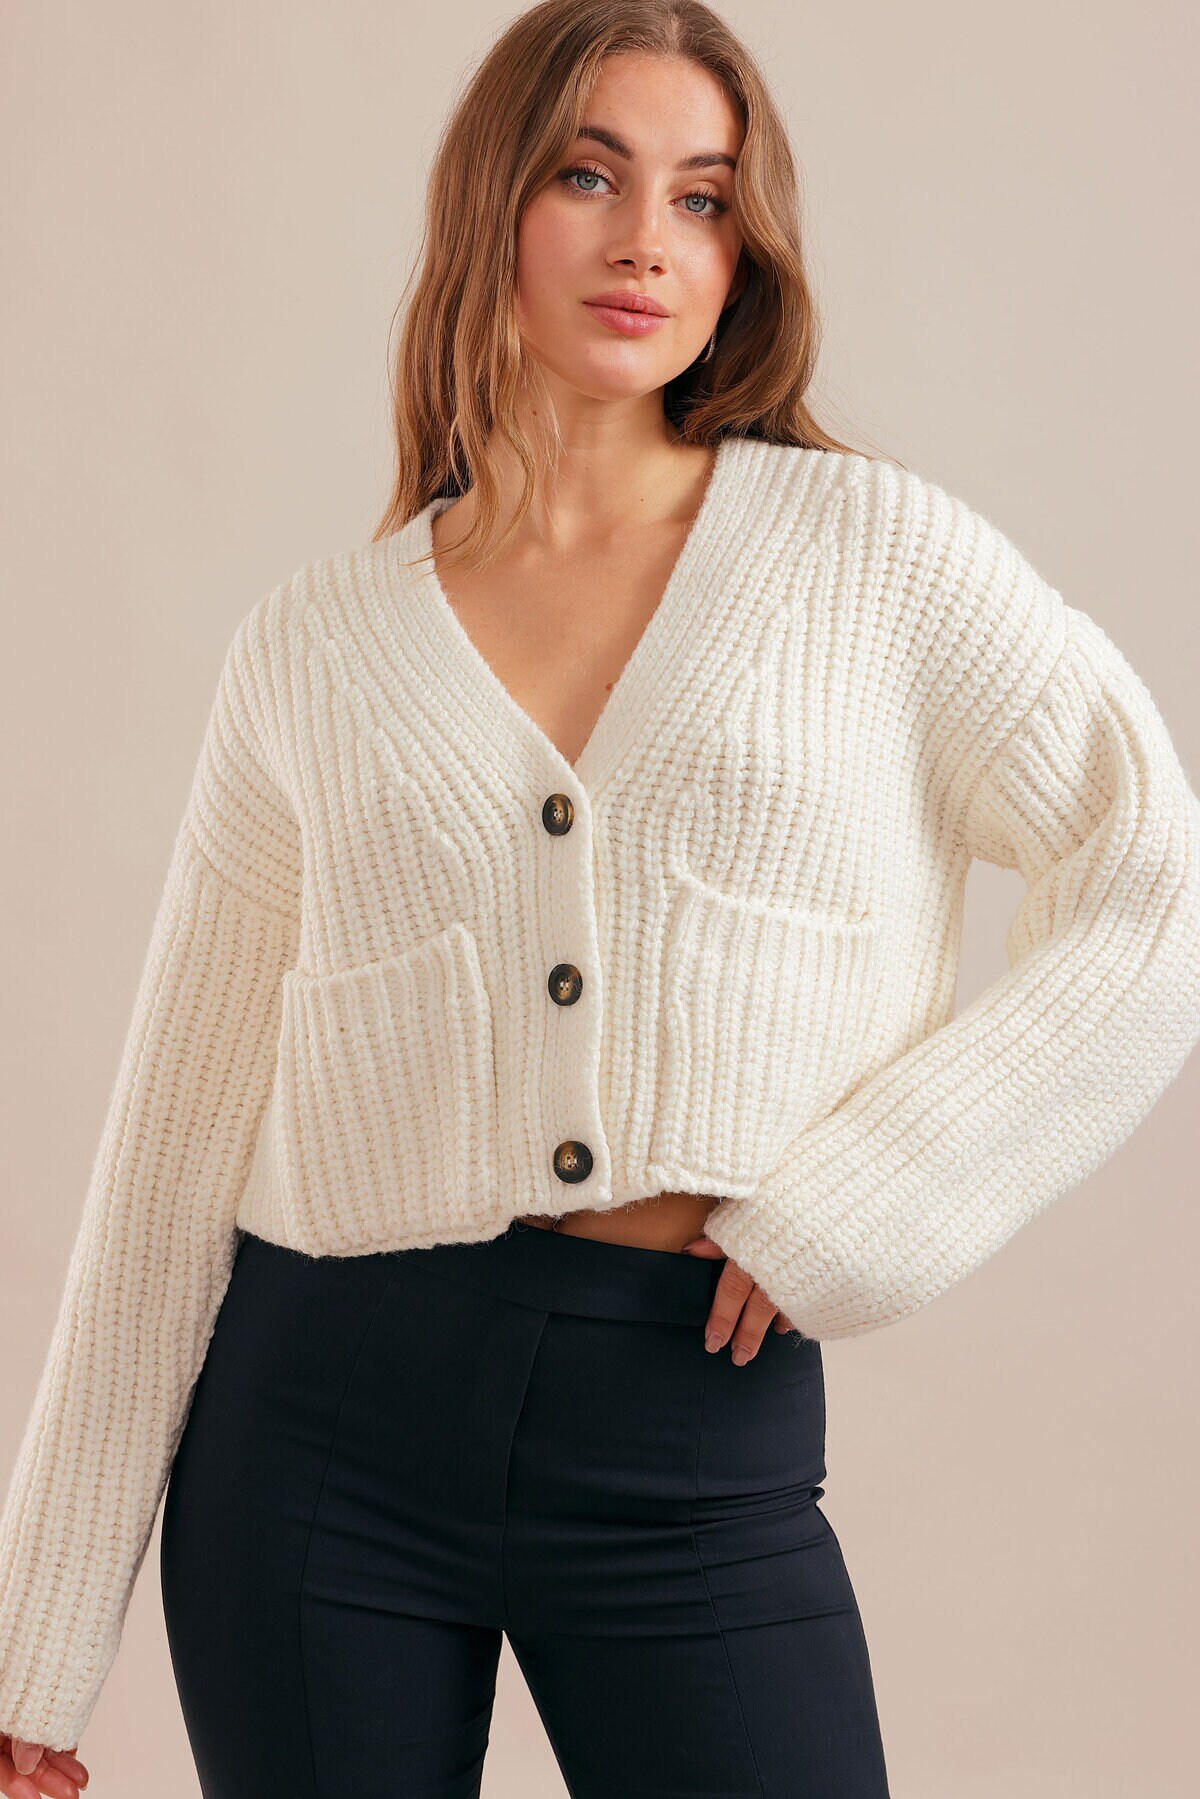 Evermore Knit Cardigan